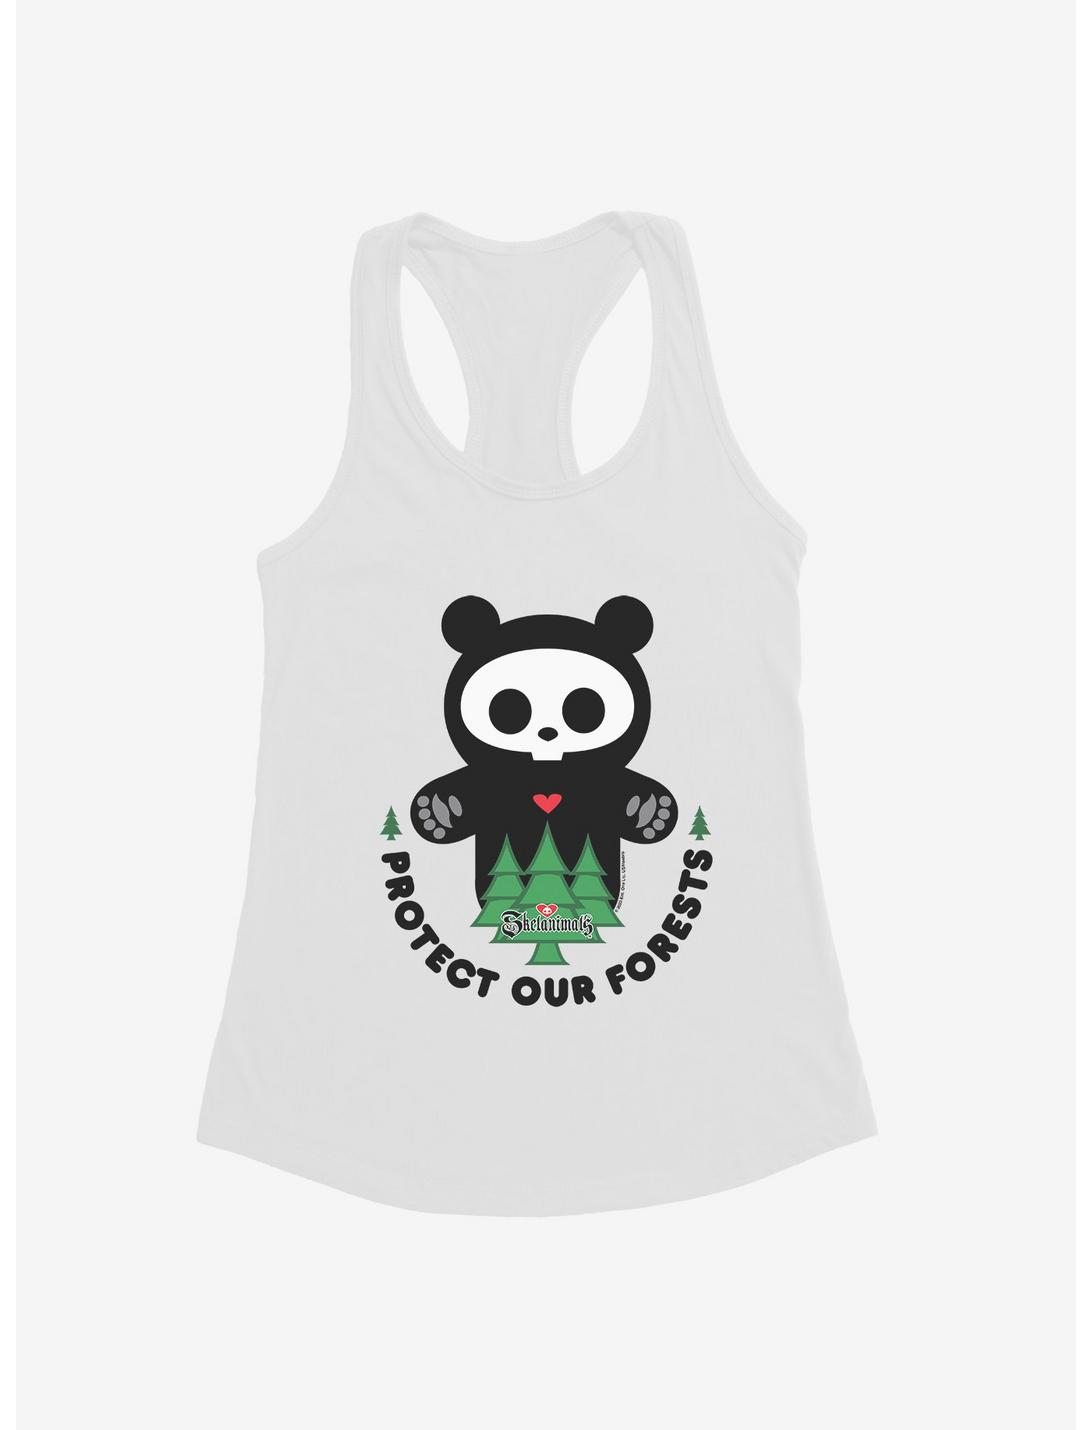 Skelanimals ChungKee Protect Our Forests Girls Tank, WHITE, hi-res